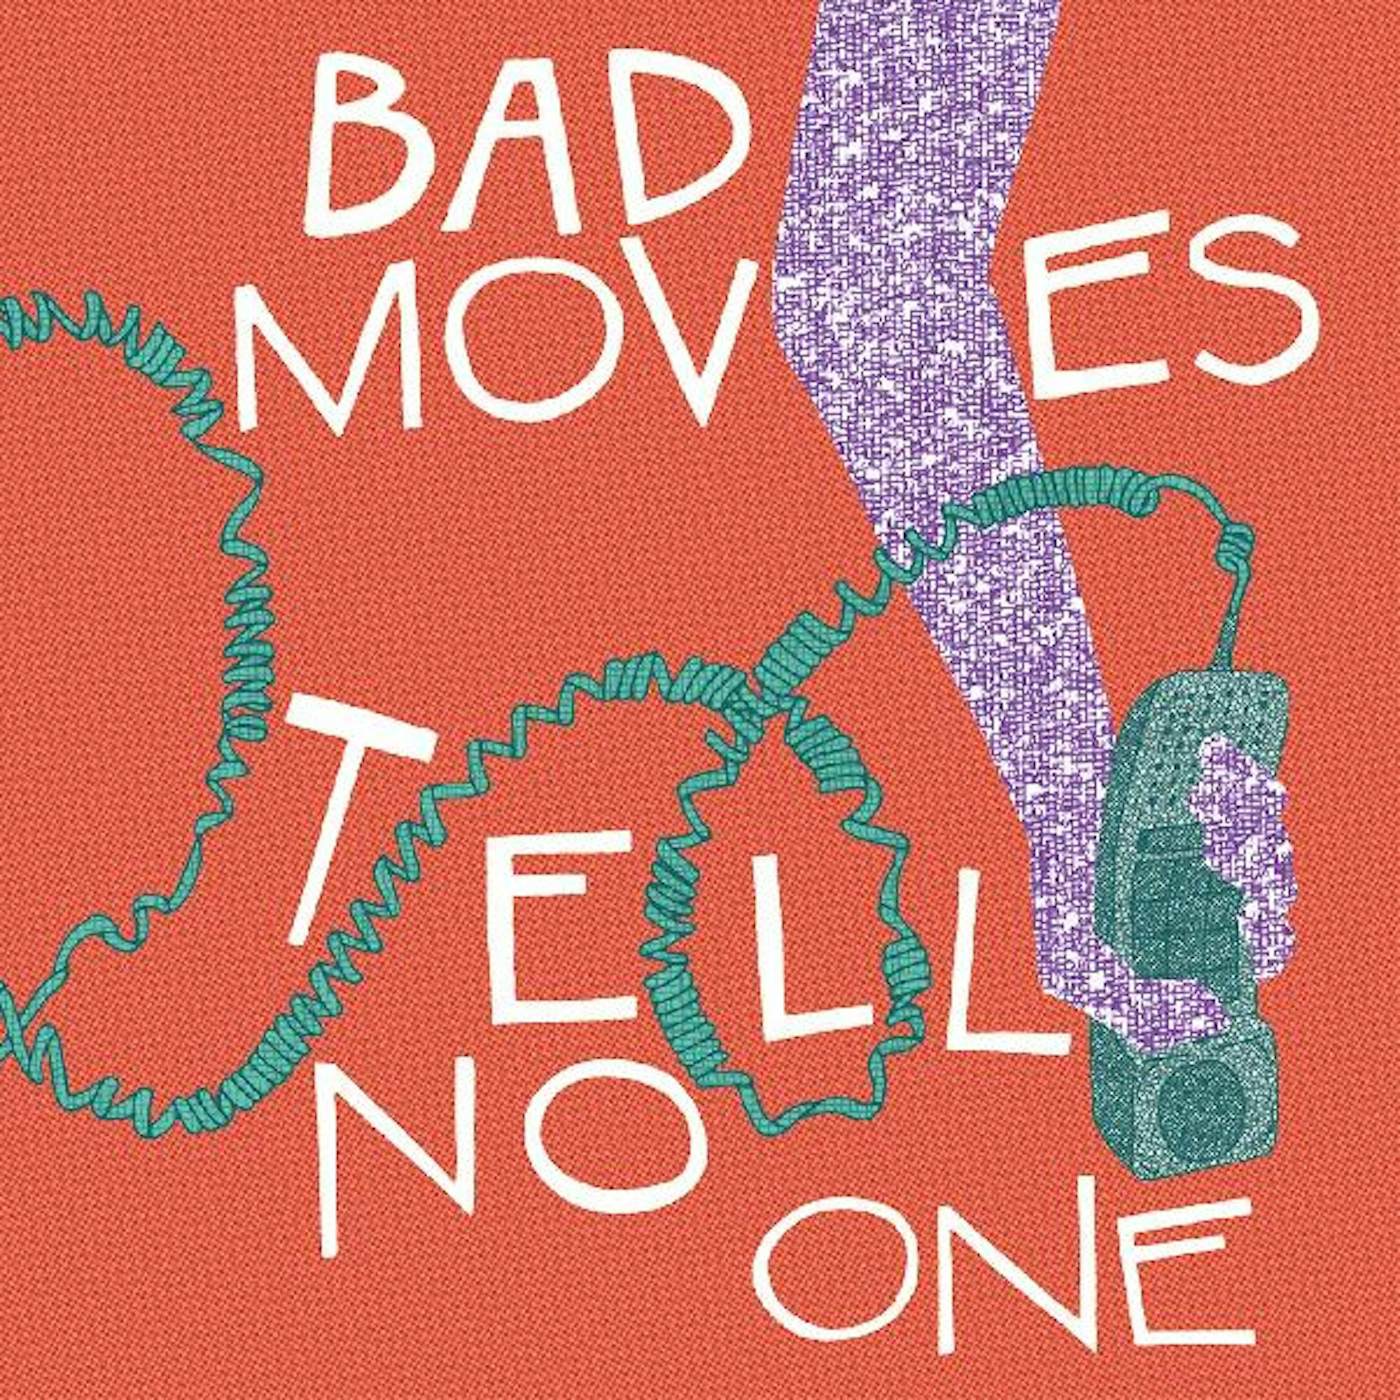 Bad Moves TELL NO ONE CD